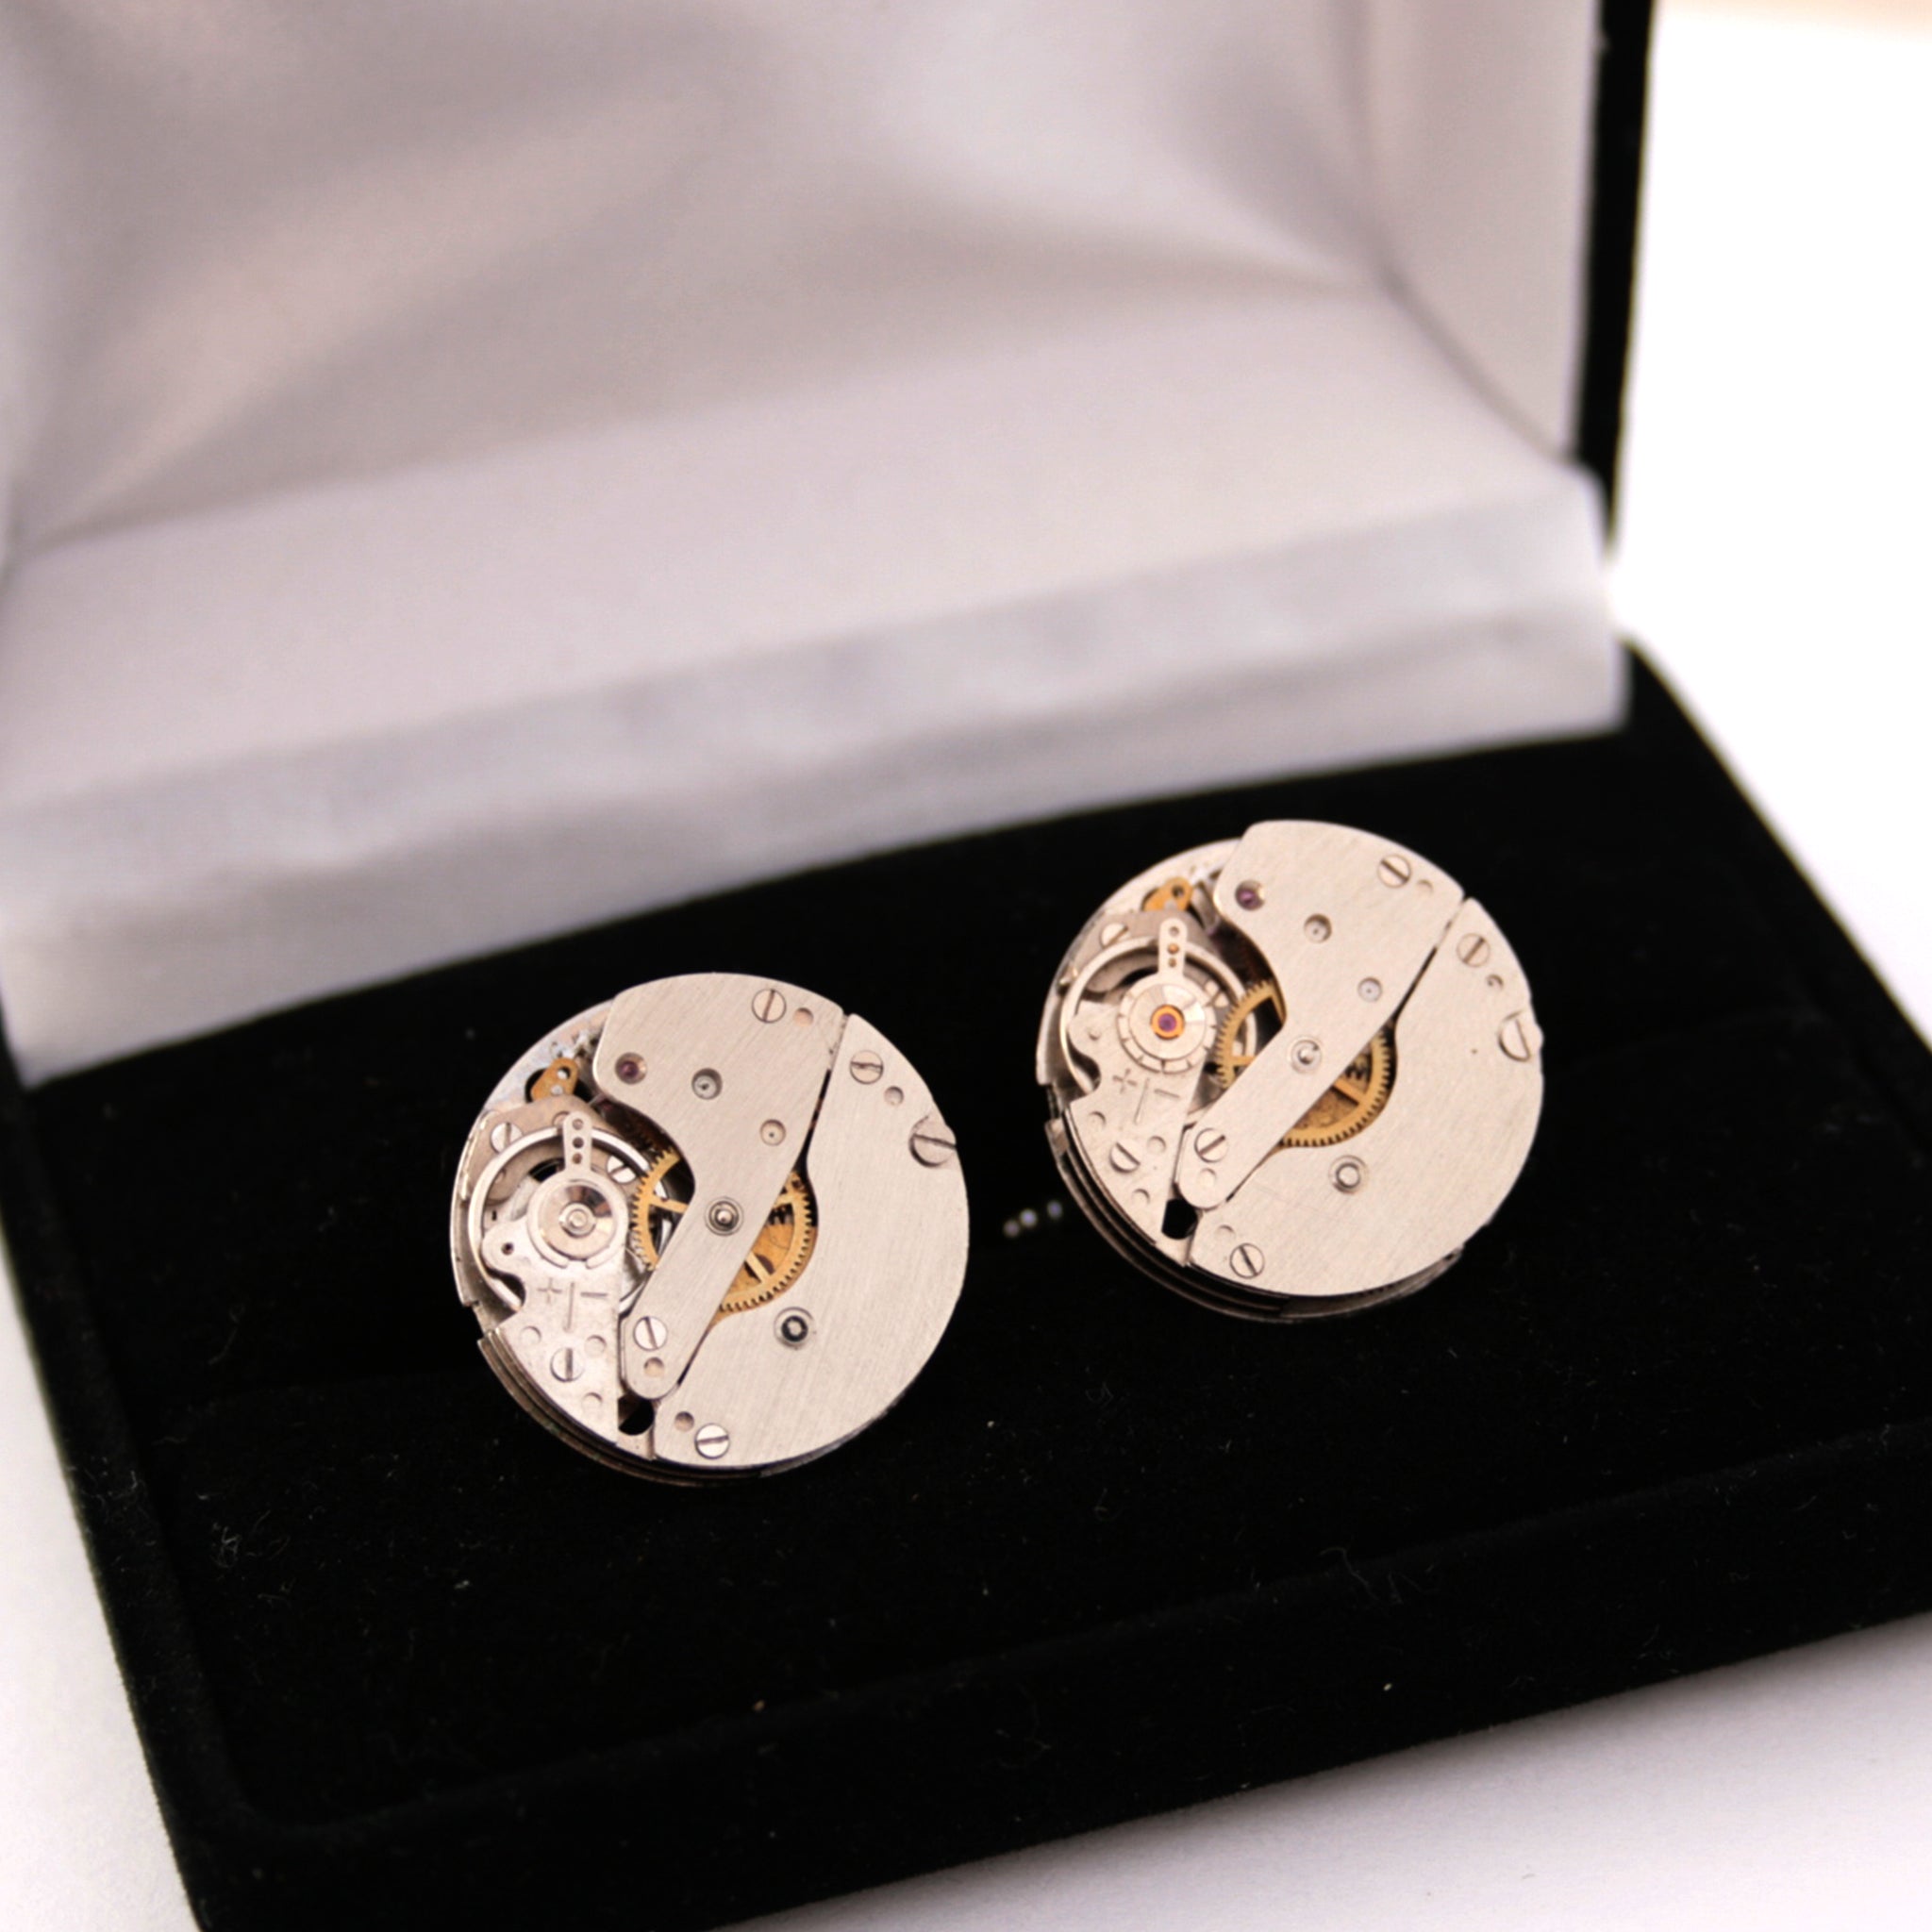 Novelty Cufflinks made of Watch Movements in black velour box